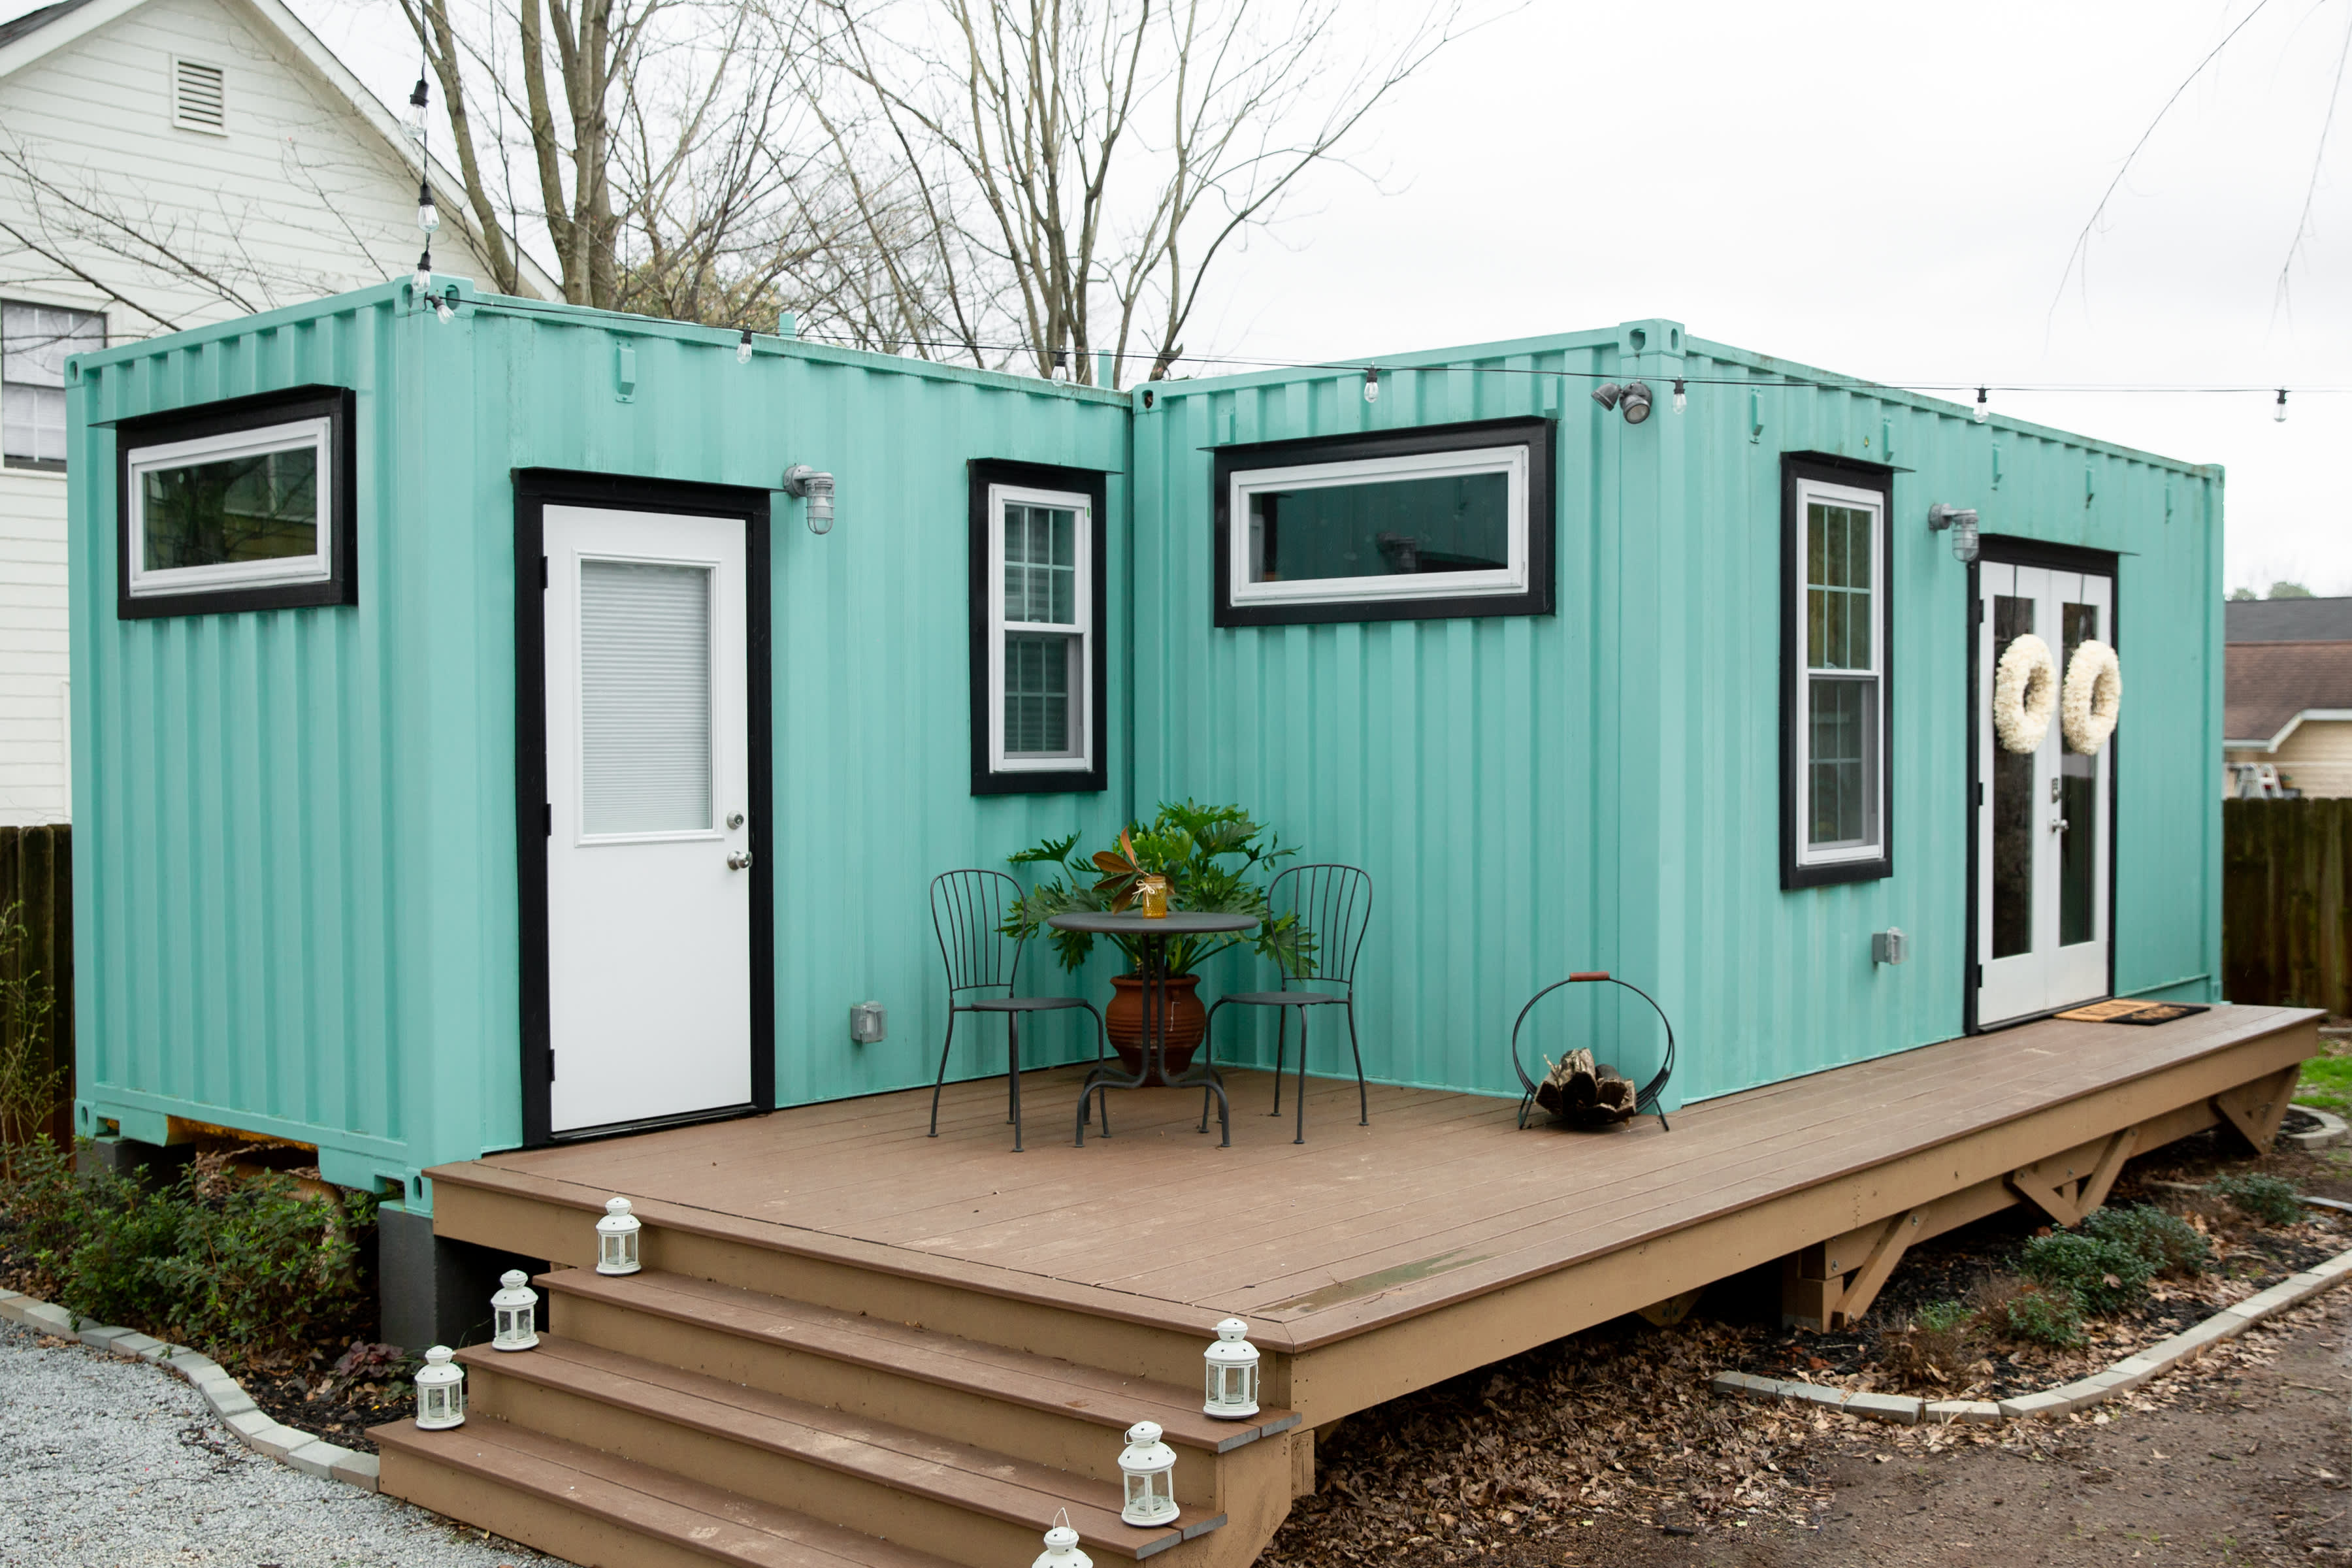 High-End Shipping Container Home Built on a DIY Budget - TINY HOUSE TOUR 